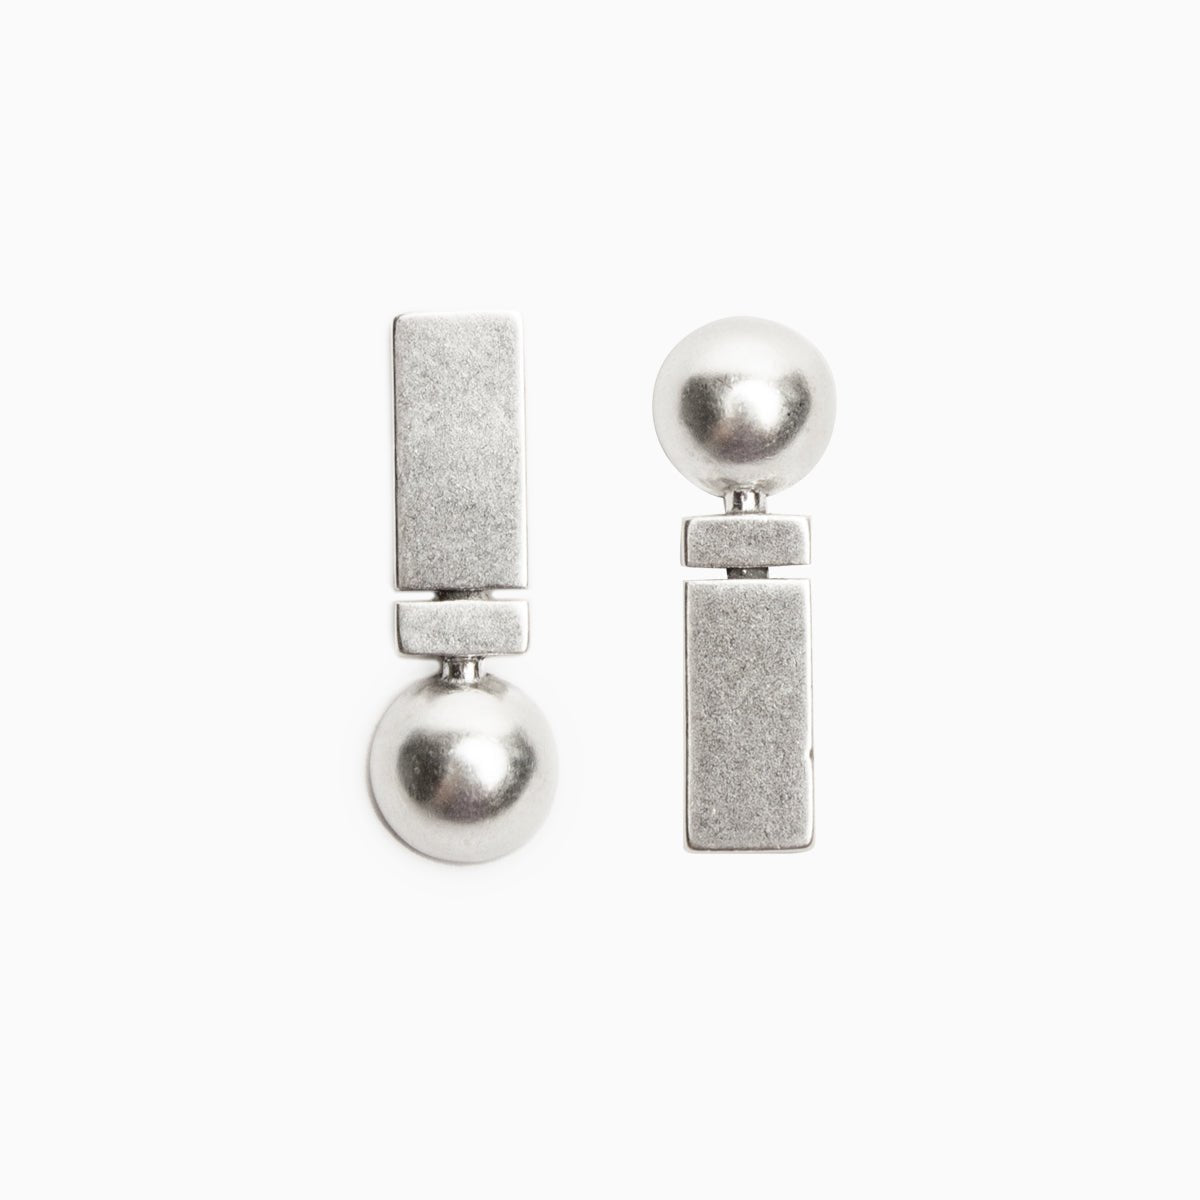 A sterling silver stud earring featuring opposing circular and rectangular shapes. The Oriri Earrings are designed and handcrafted in Portland, Oregon.